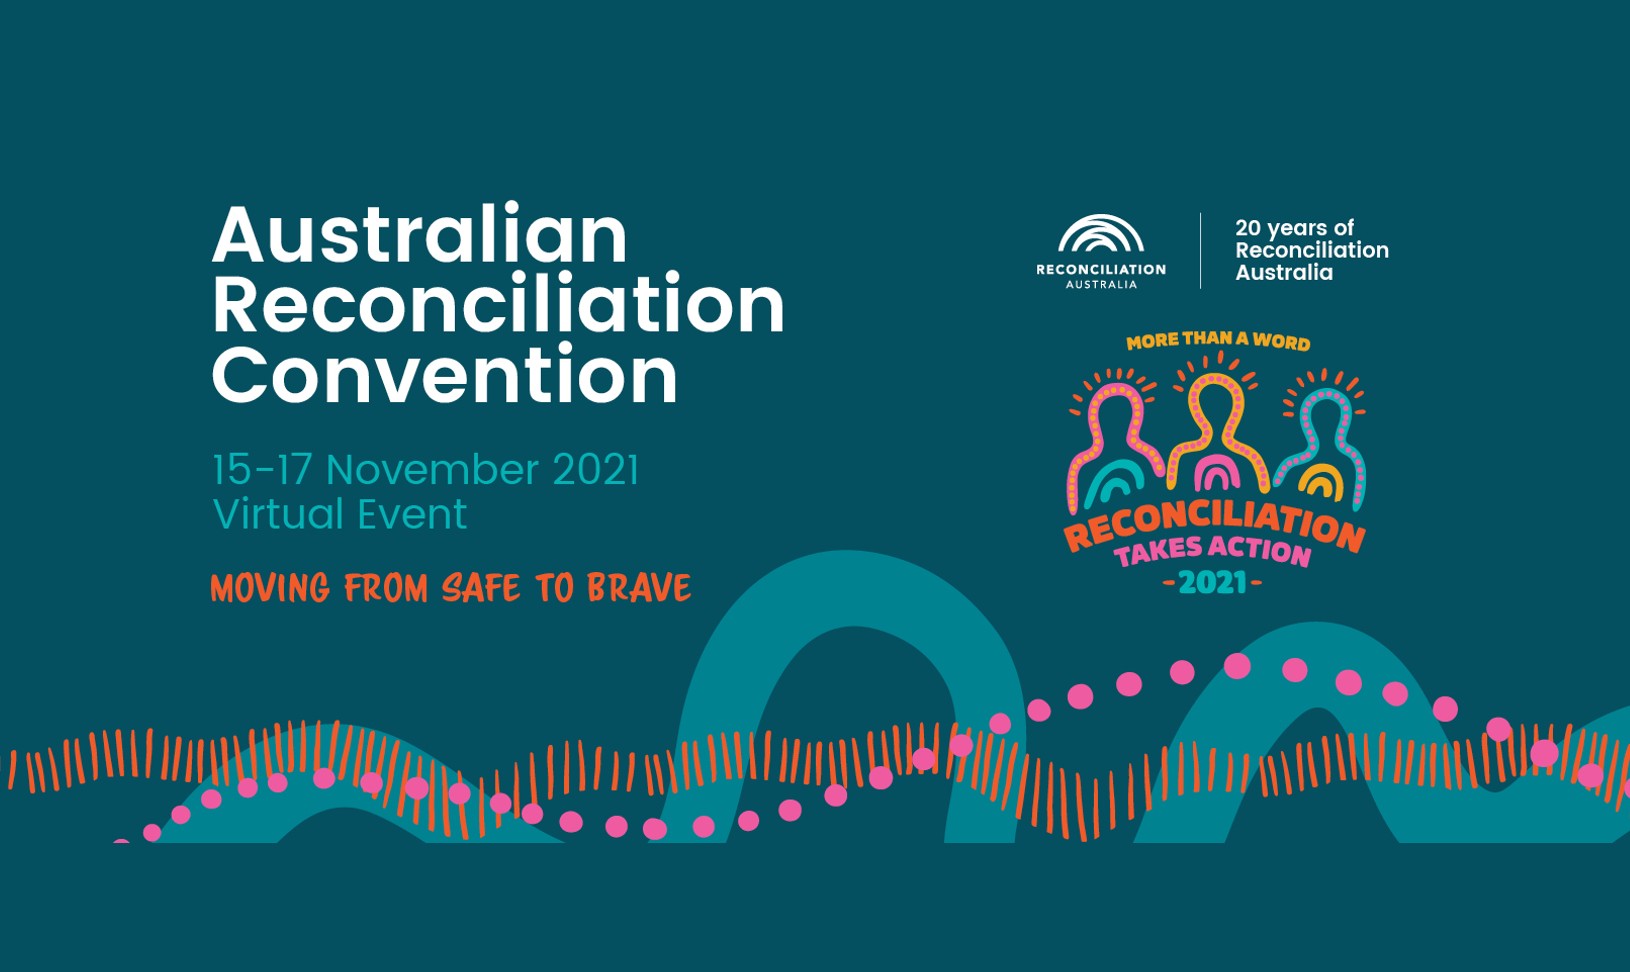 Australian Reconciliation Convention - a virtual event from 15 to 17 November 2021